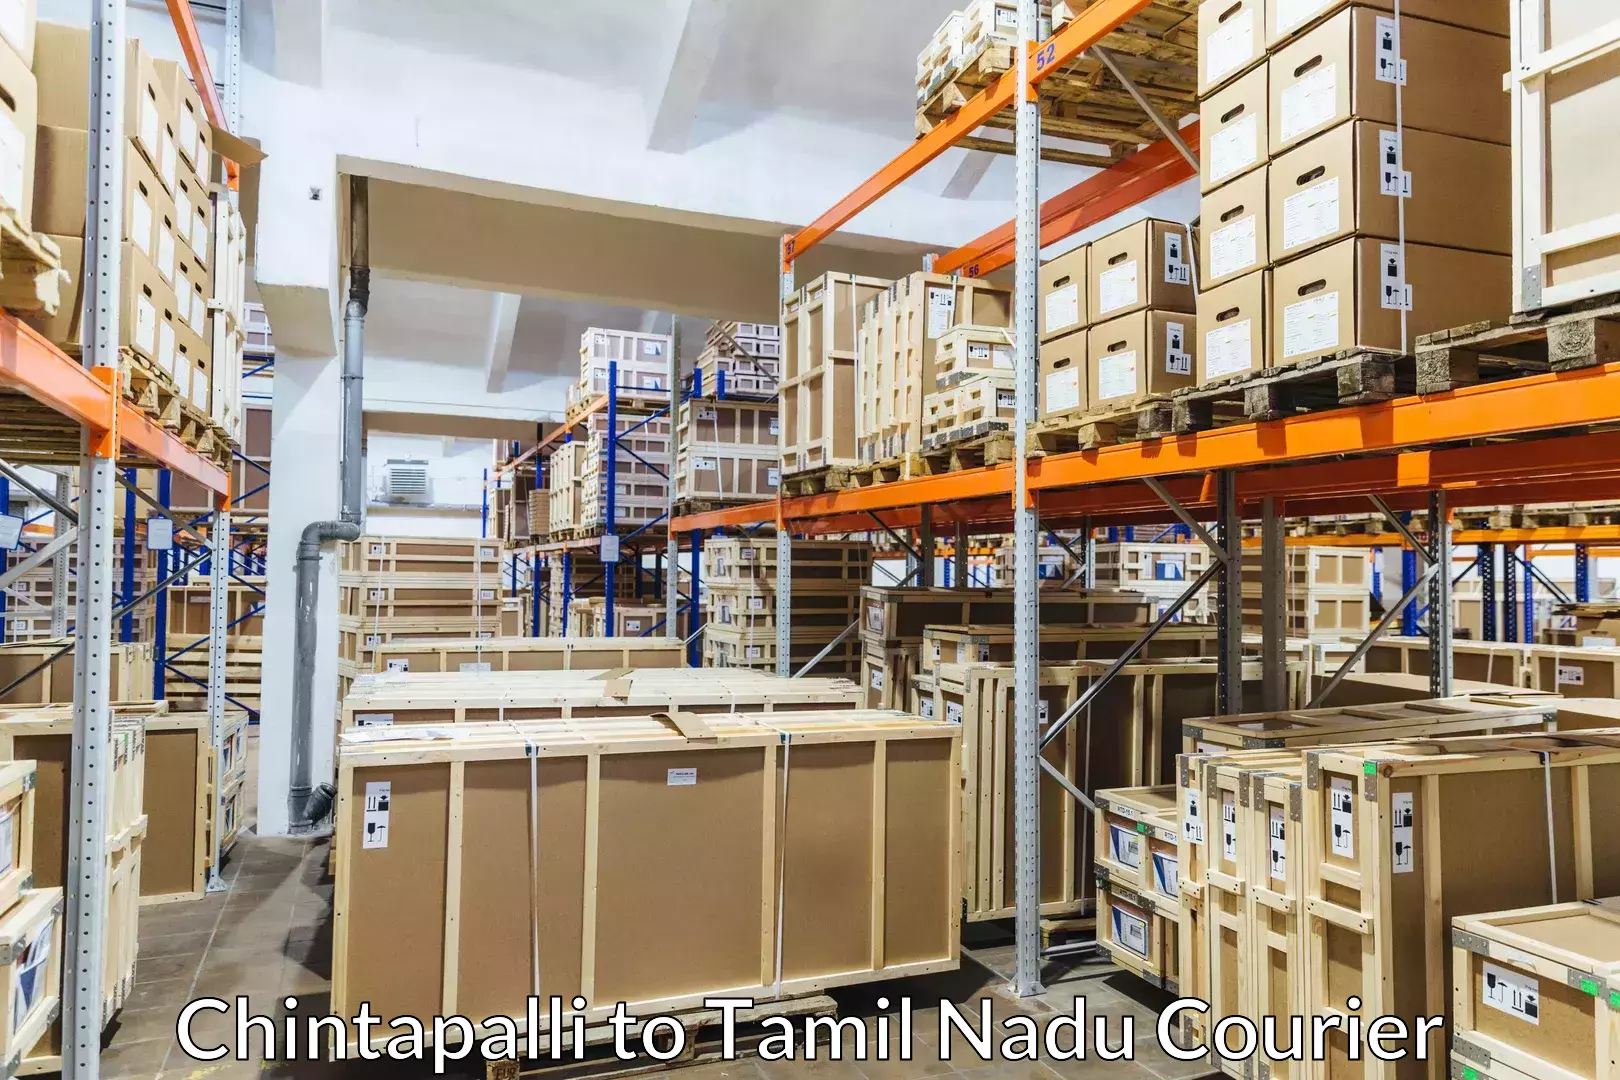 Budget-friendly moving services in Chintapalli to Ambattur